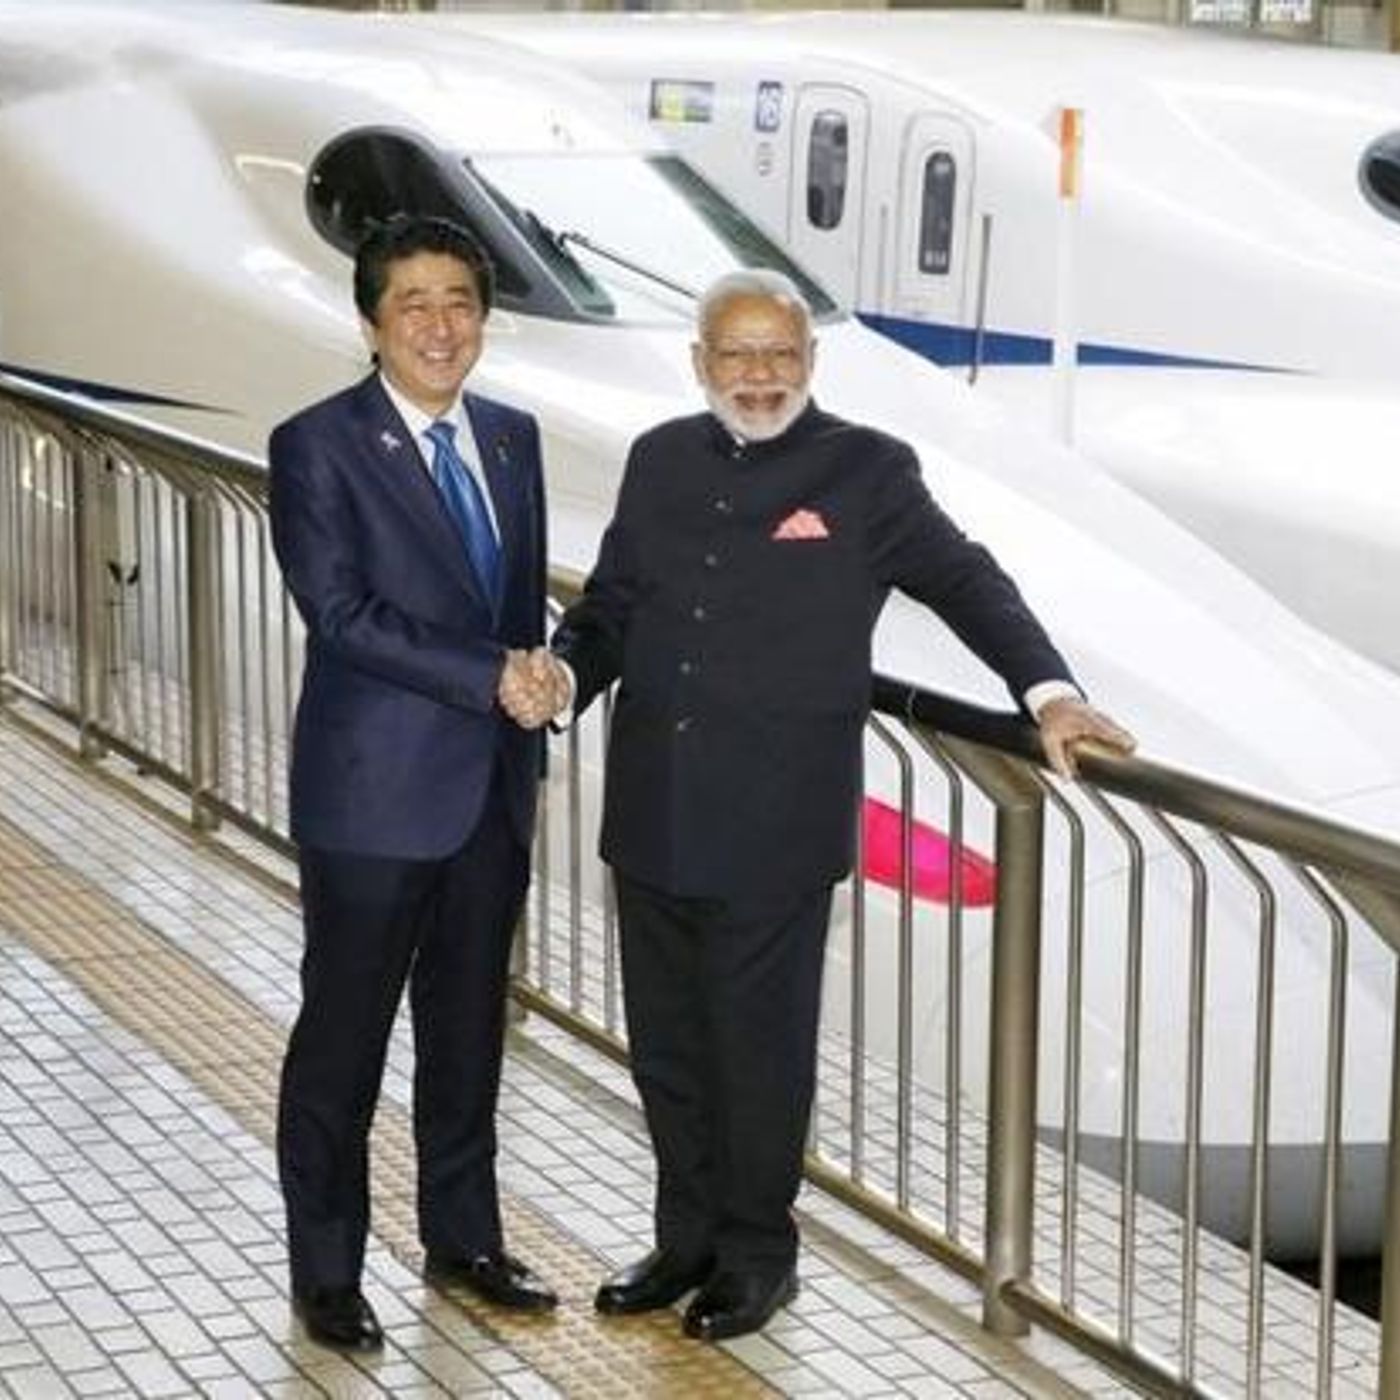 India-Japan ties, Apple iPhone X and Thomas Piketty and inequality in India